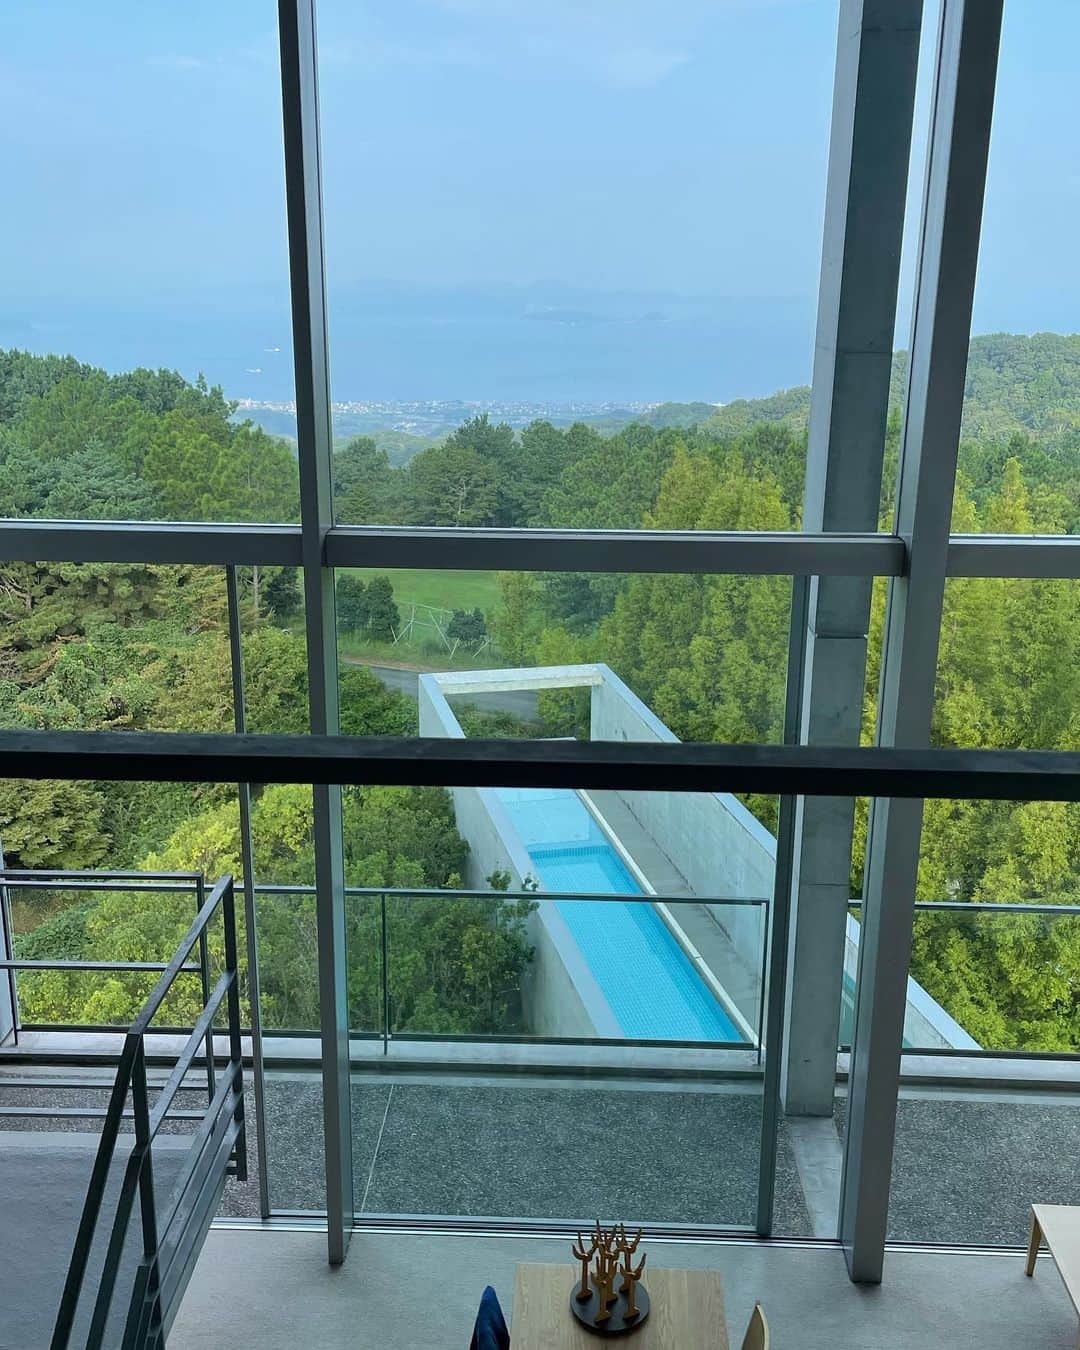 ミーシャ・ジャネットさんのインスタグラム写真 - (ミーシャ・ジャネットInstagram)「(日本語下記^^) The Setouchi inlet sea is where we stowed away in this stunning retreat. The most heart-stopping view, dotted with islands - as tall as the Tokyo Sky Tree is from sea level. I didn’t know it was my dream to stay in a hotel until I got here.   As the sun set, it burned neon pink and burned the world in its brilliant hue. Reality, or all of the anxiety that comes with reality, was gone for a moment.   Designed by Tadao Ando and now a private 7-room resort, we never could have gotten in with tourists abound. It was our last chance, and we took it. This isn’t sponcon, just a couple of friends who shared in the desire to spend some money so we could try to stop time for one night. And we did it. A highly recommended experience.   太陽が世界をショッキングピンクの色に染まりながら、ベランダから瀬戸内を見渡しました。その一瞬、悩みと不安が太陽と一緒に地平線へ溶け込んだ。あのピンク、iPhoneじゃ伝わらない色。あの一瞬、言葉じゃ伝わらない気持ち。  この部屋の高さは、スカイツリーと同じくらいらしい。ここはスポンサーや広告じゃなく、ただ友達4人揃って、自分へのご褒美として泊まりたかっただけ。仕事に対するありがたさを感じた。毎日はハードでも💪🏻  ってか、こういう安藤忠雄によるデザインはどタイプだ。そして、四国はとてもきれい。また、その気持ちを感じに青凪リトリートに来たいと思う♨️   #青凪リトリート #青凪 #tadaoando #japaneseretreat #japanluxuryhotel  #luxuryjapan #setouchihotel #thedesignhotelsbook #瀬戸内ホテル #traveljapan #designerhoteljapan #designerhotel #onceinalifetimeexperience」10月3日 23時17分 - mishajanette